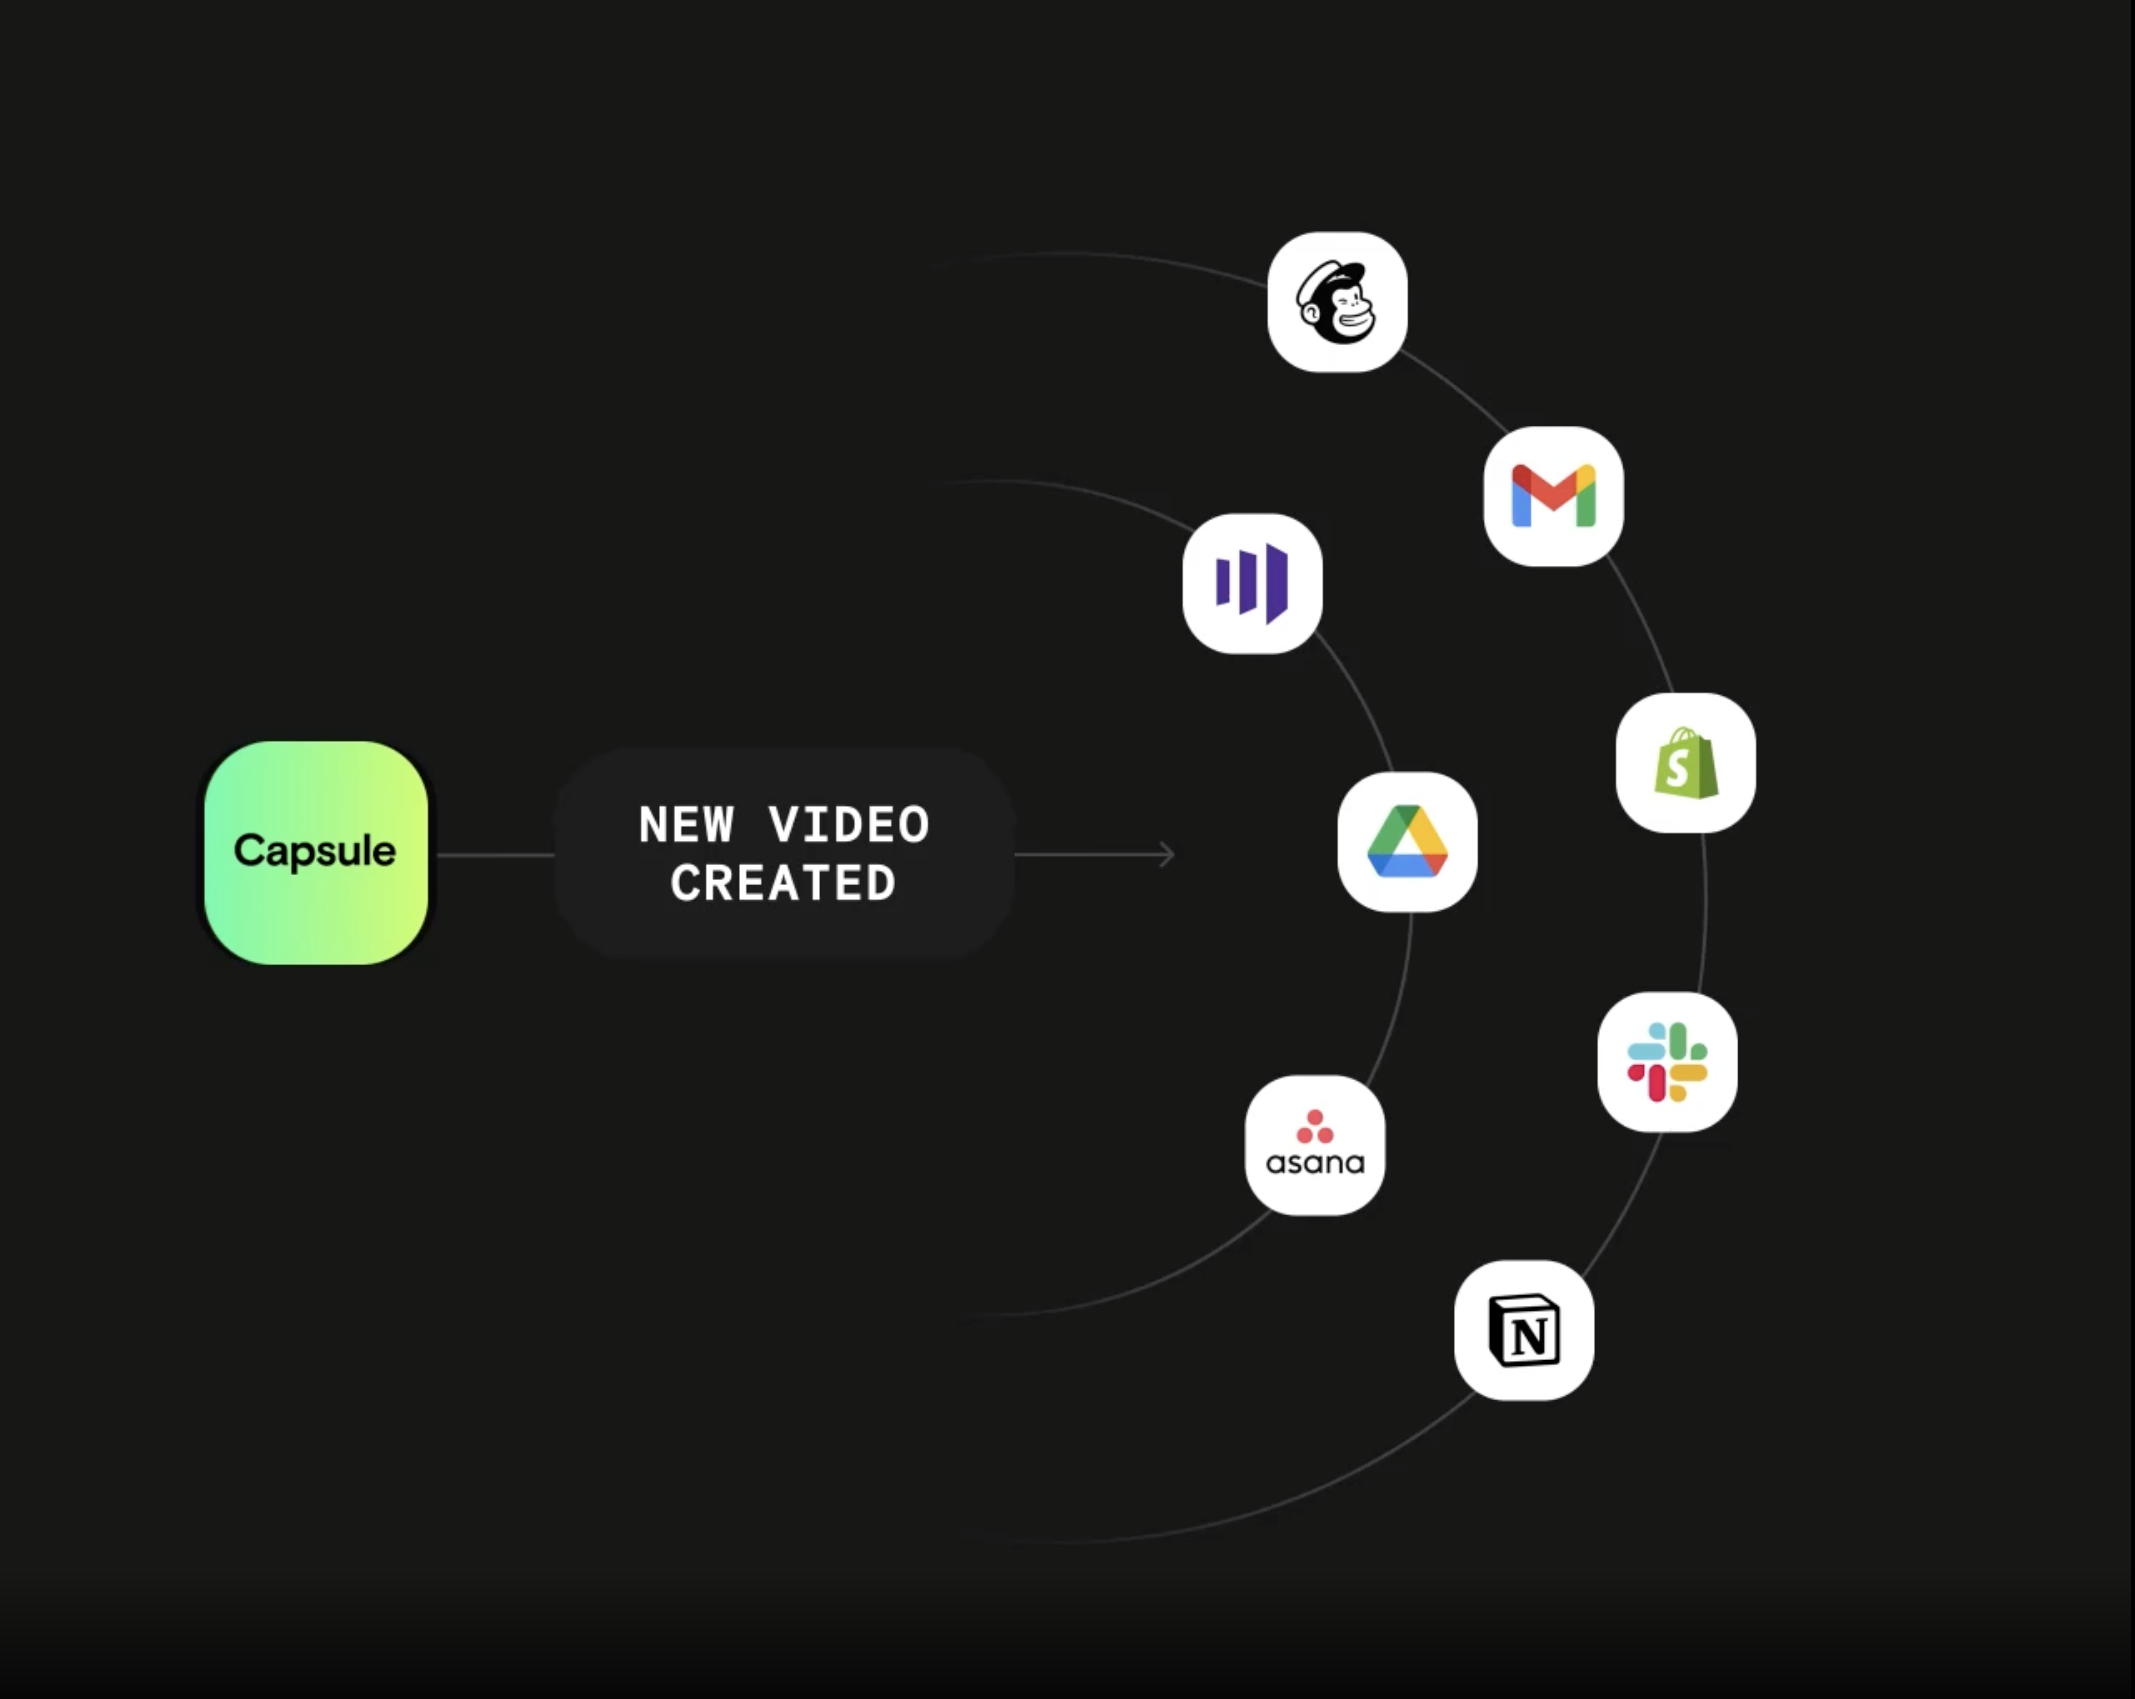 Use webhooks to integrate Capsule with your favorite apps, so you can share new videos across platforms like Slack, Notion, and more.